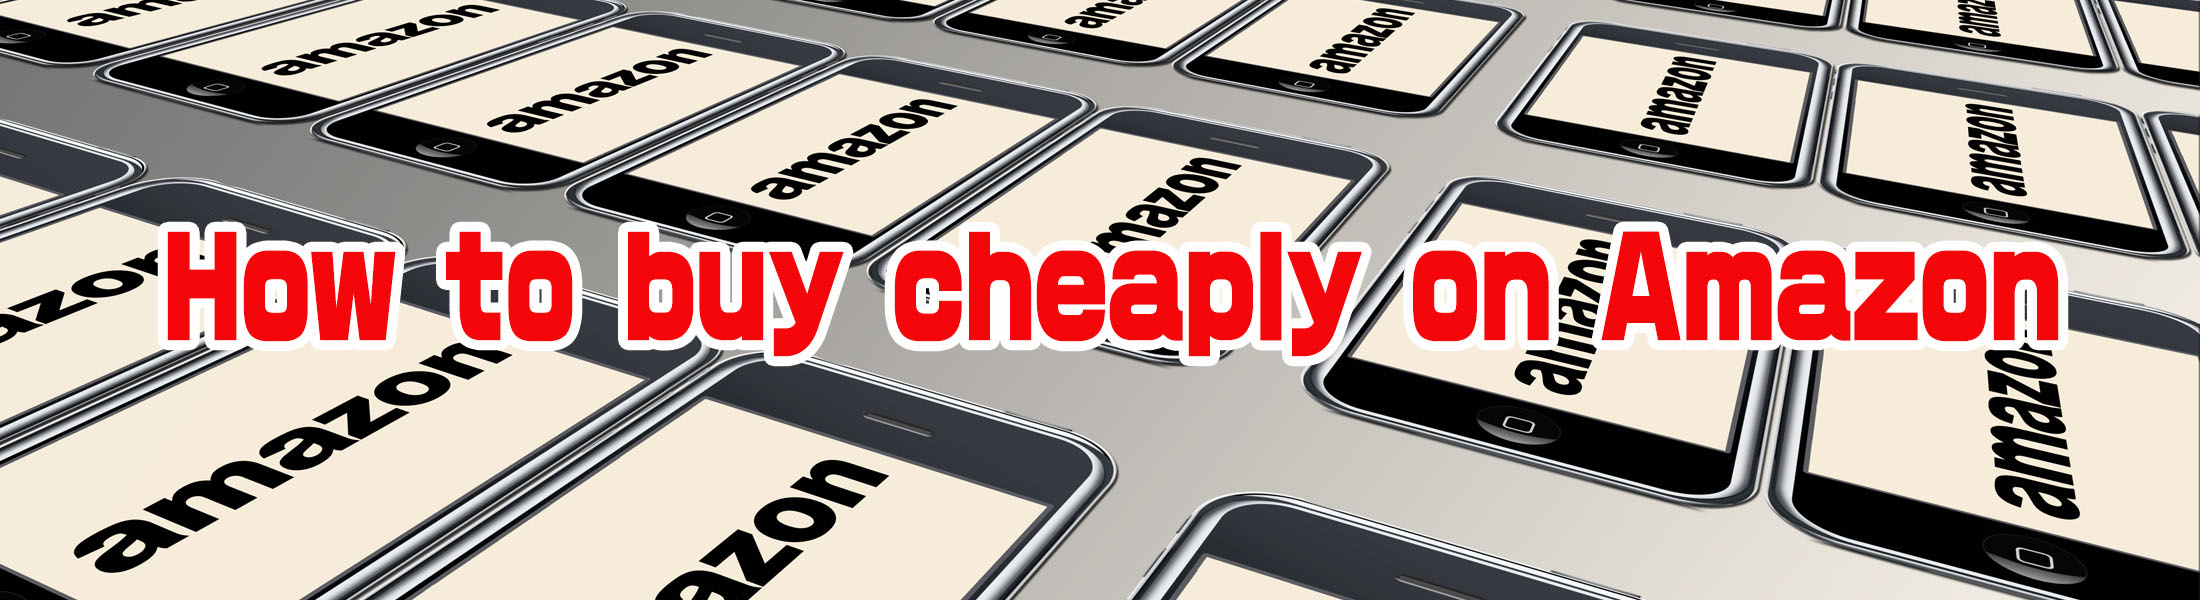 How to buy cheaply on Amazon